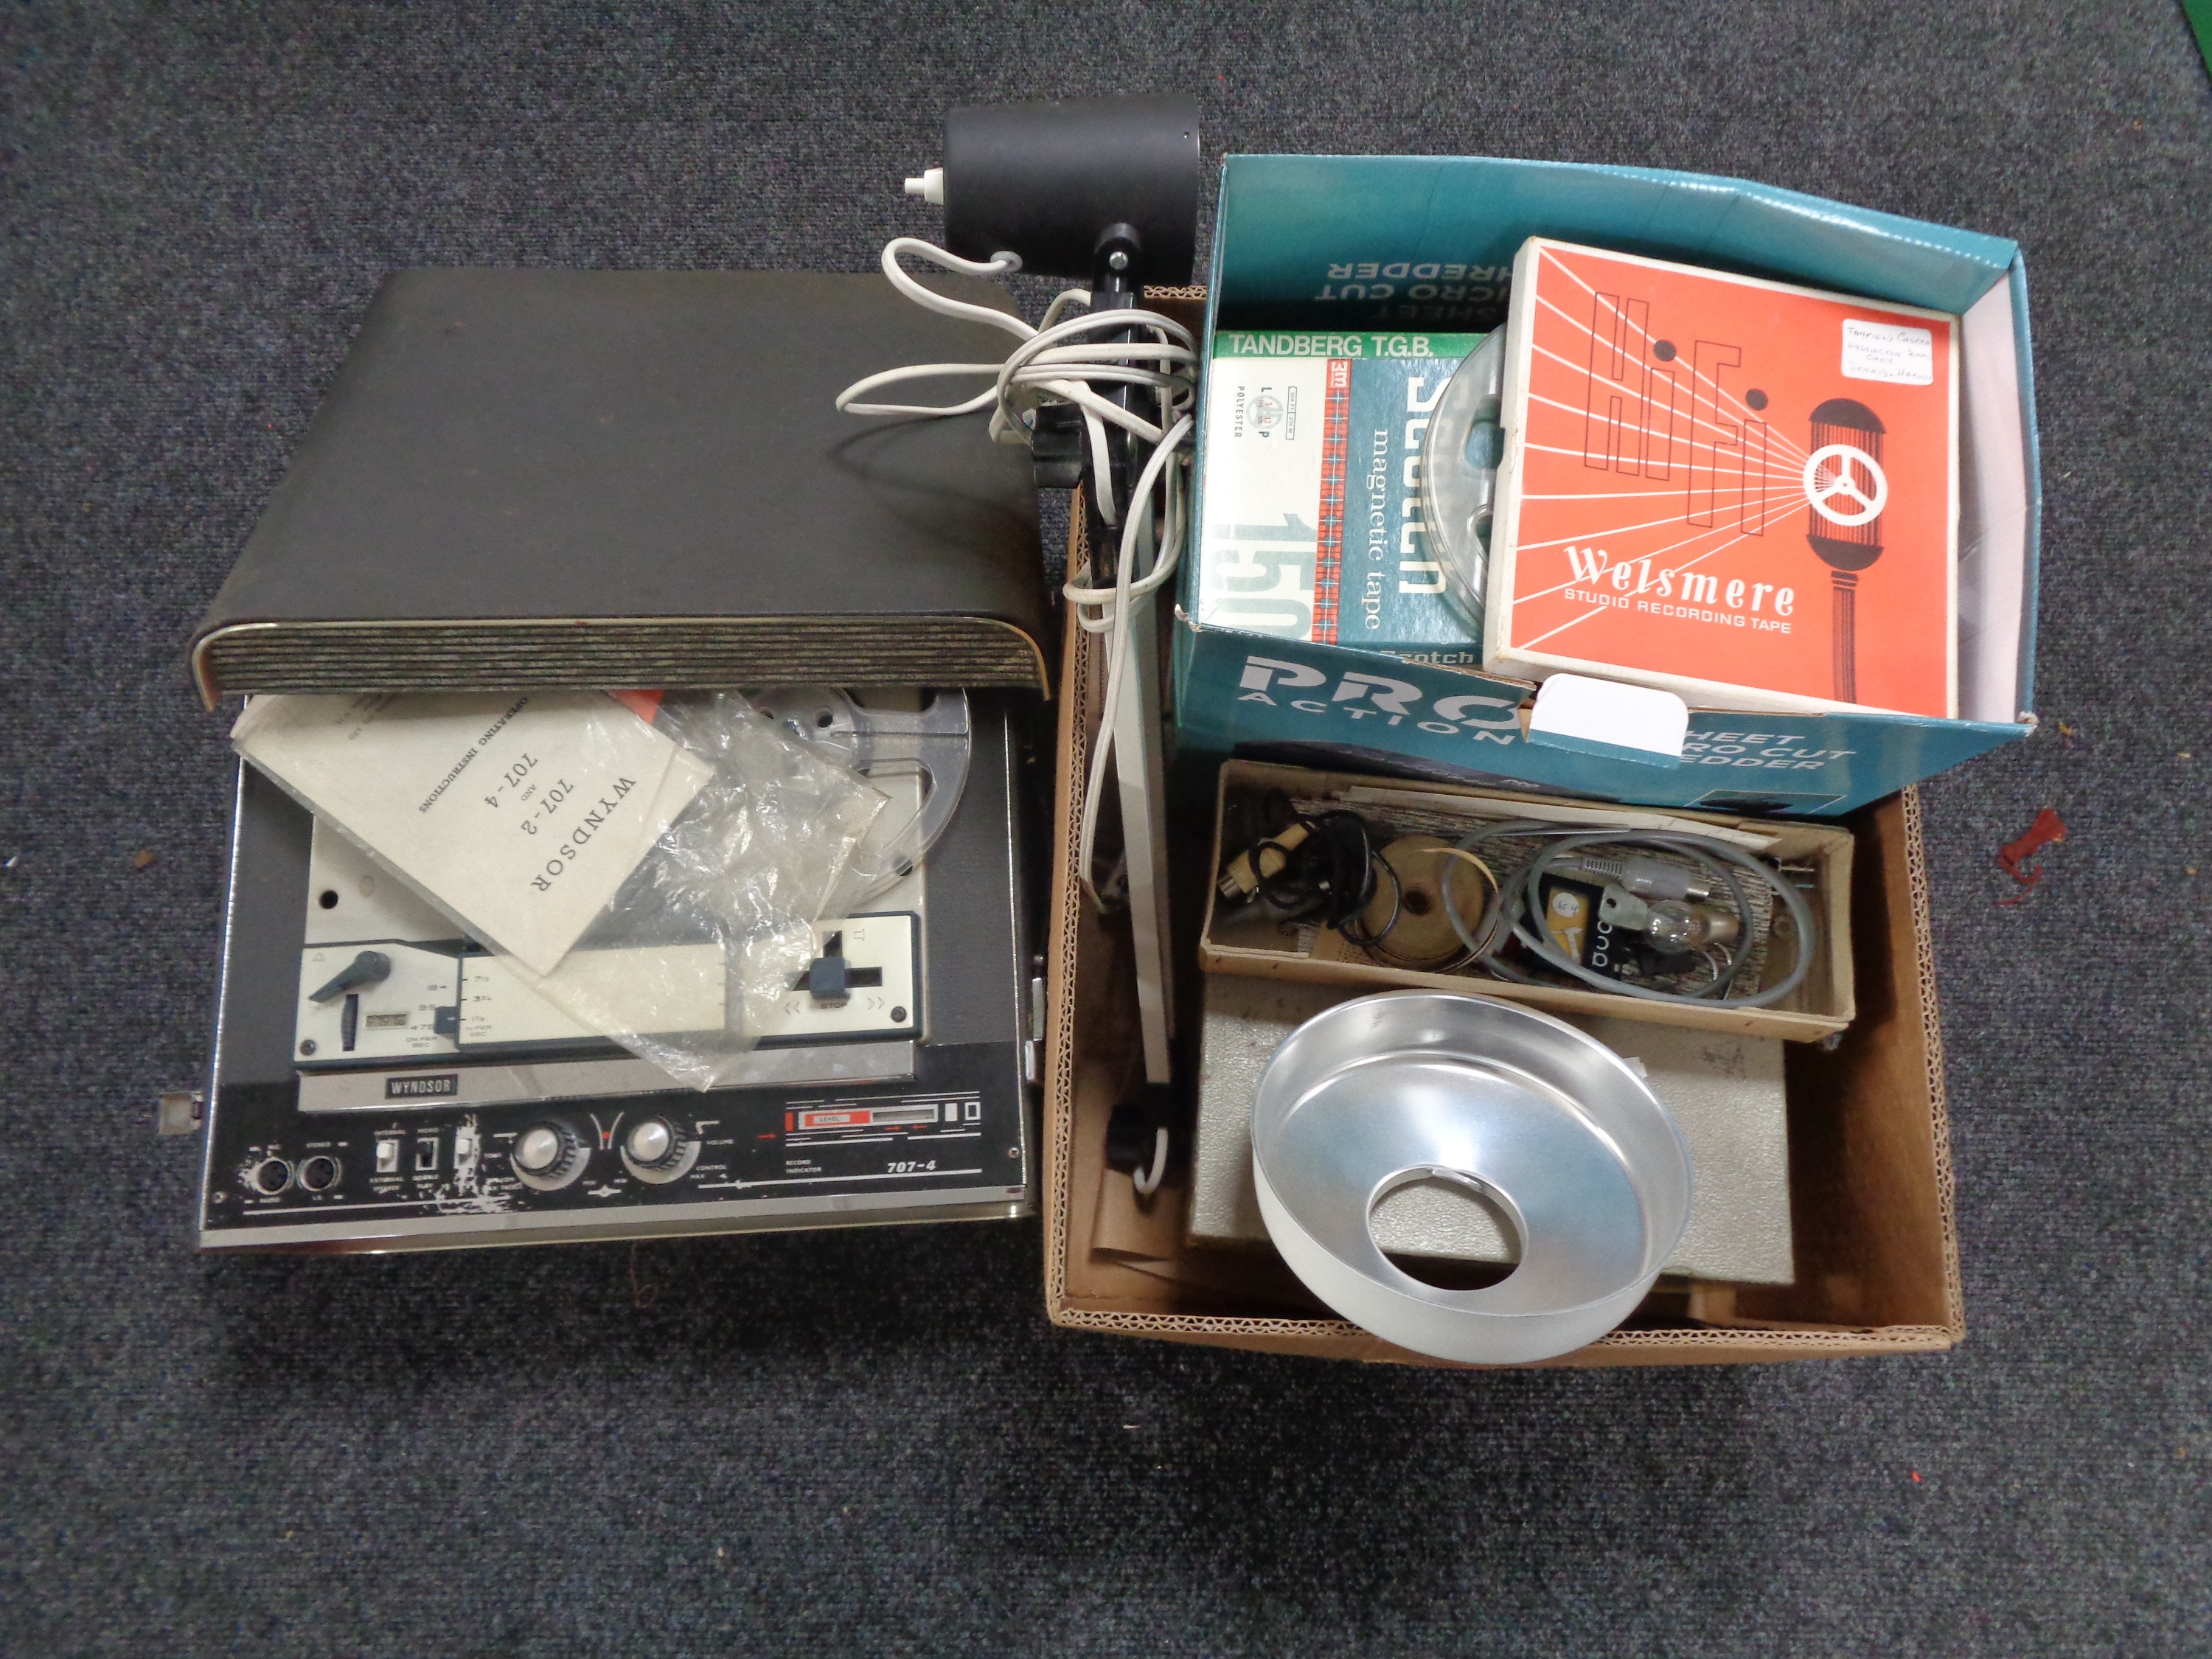 A Wyndsor reel to reel player together with a box containing recording tapes,